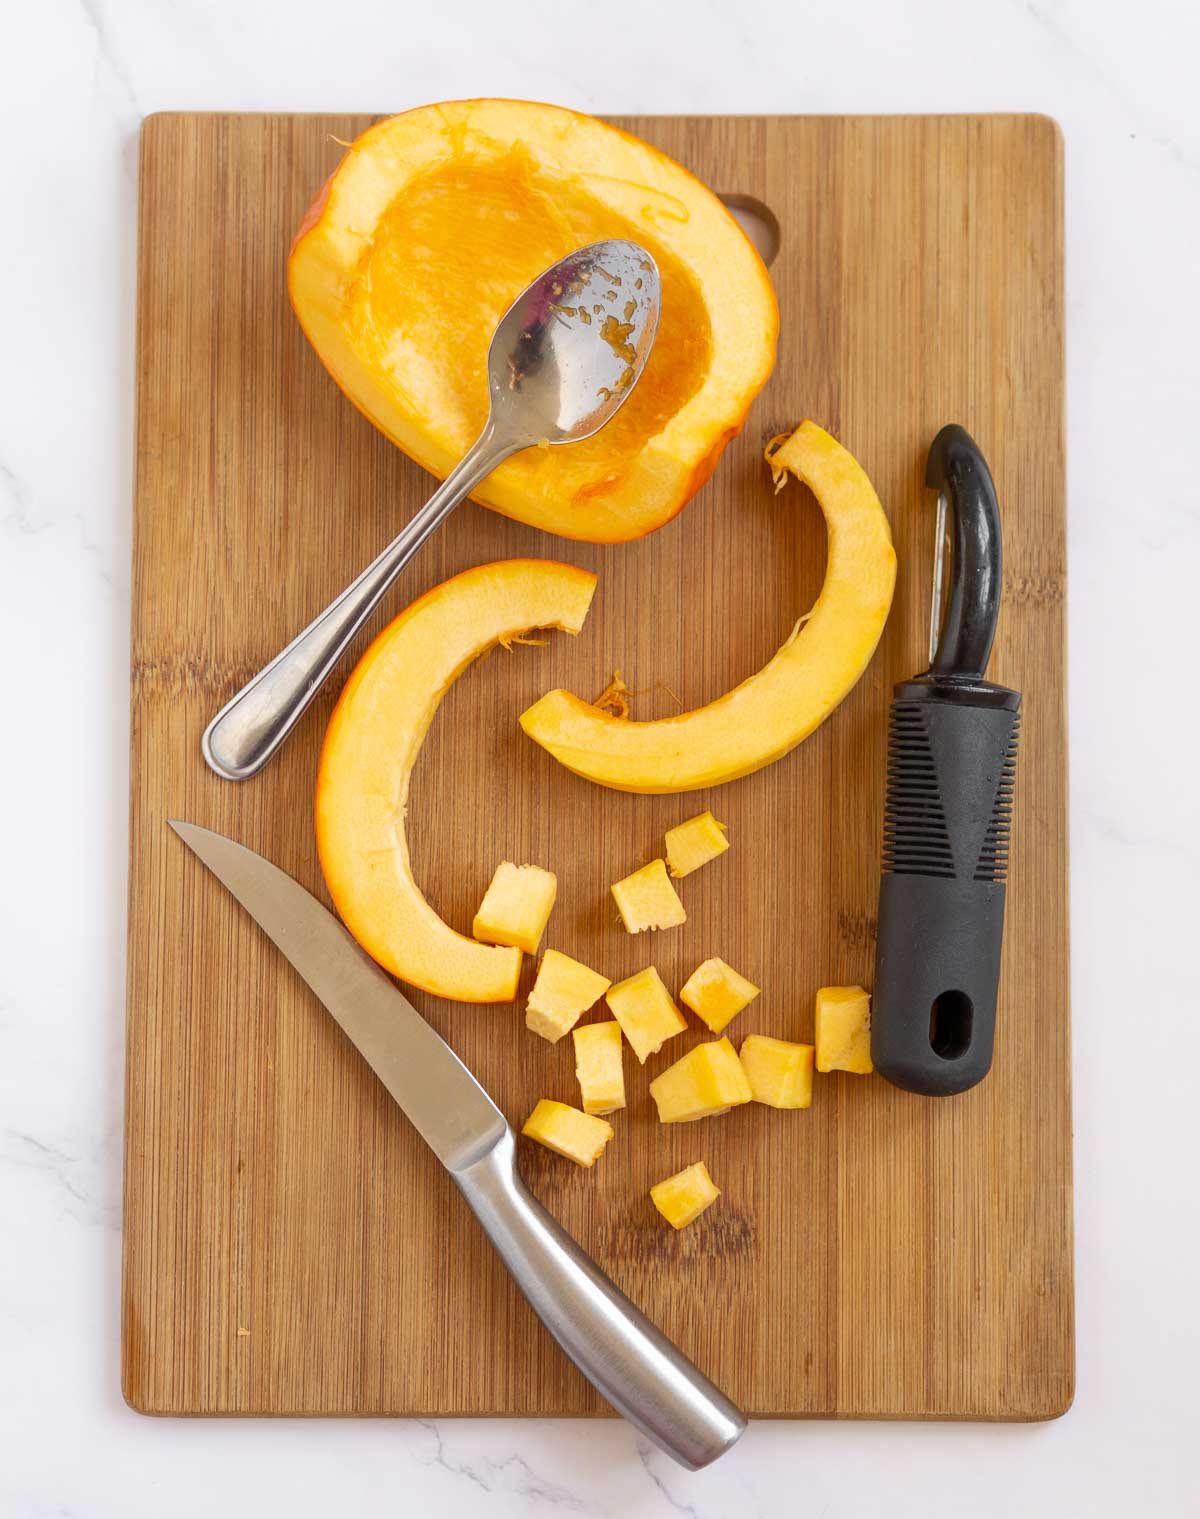 Showing how to dice pumpkin on a cutting board